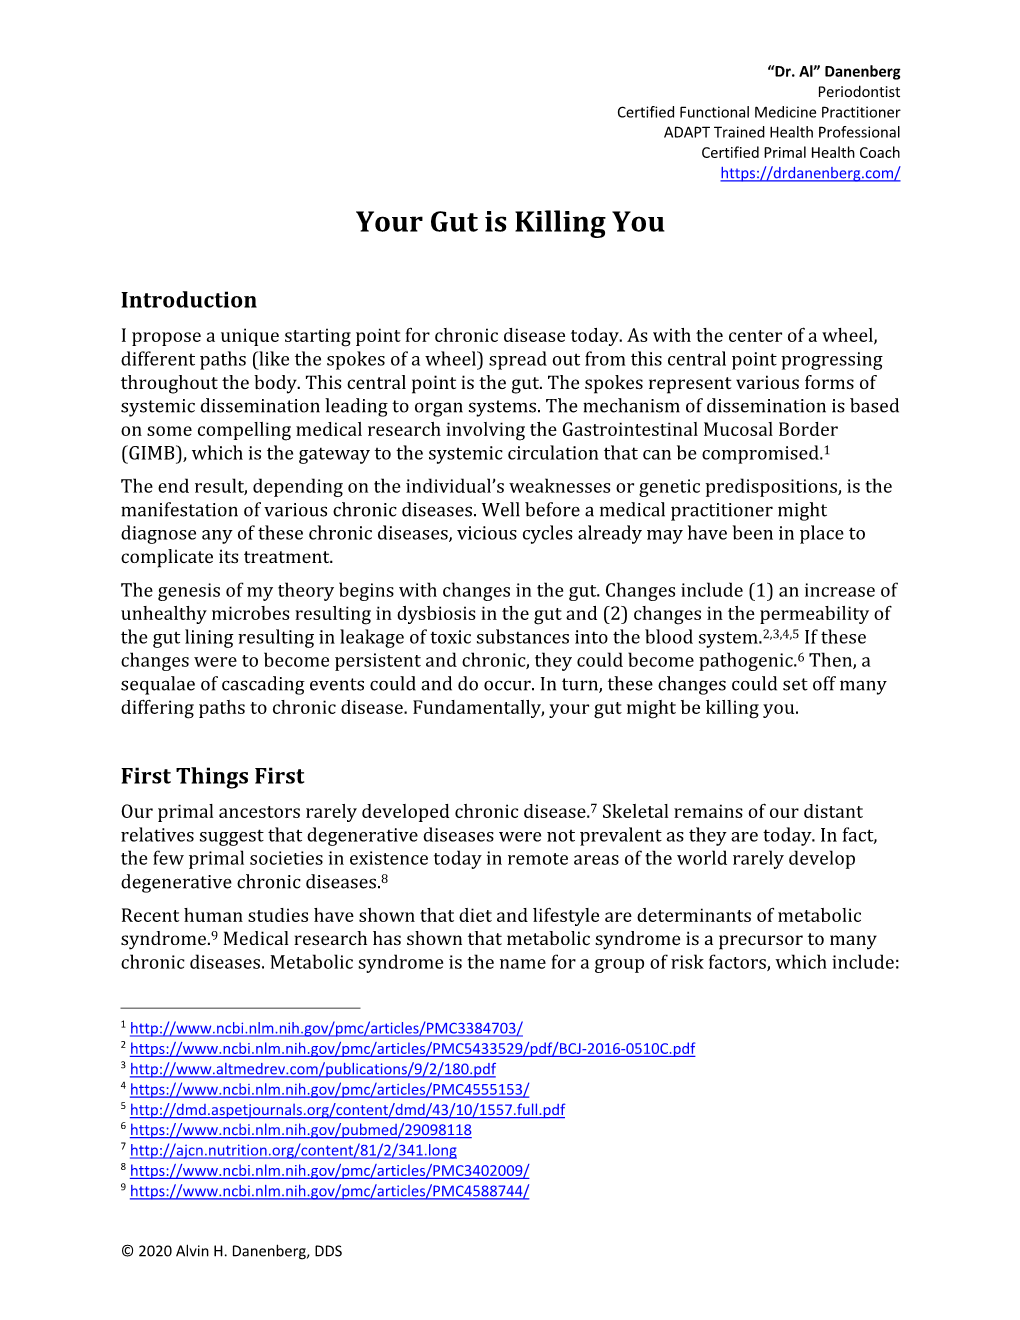 * Your Gut Is Killing You 2.10.20